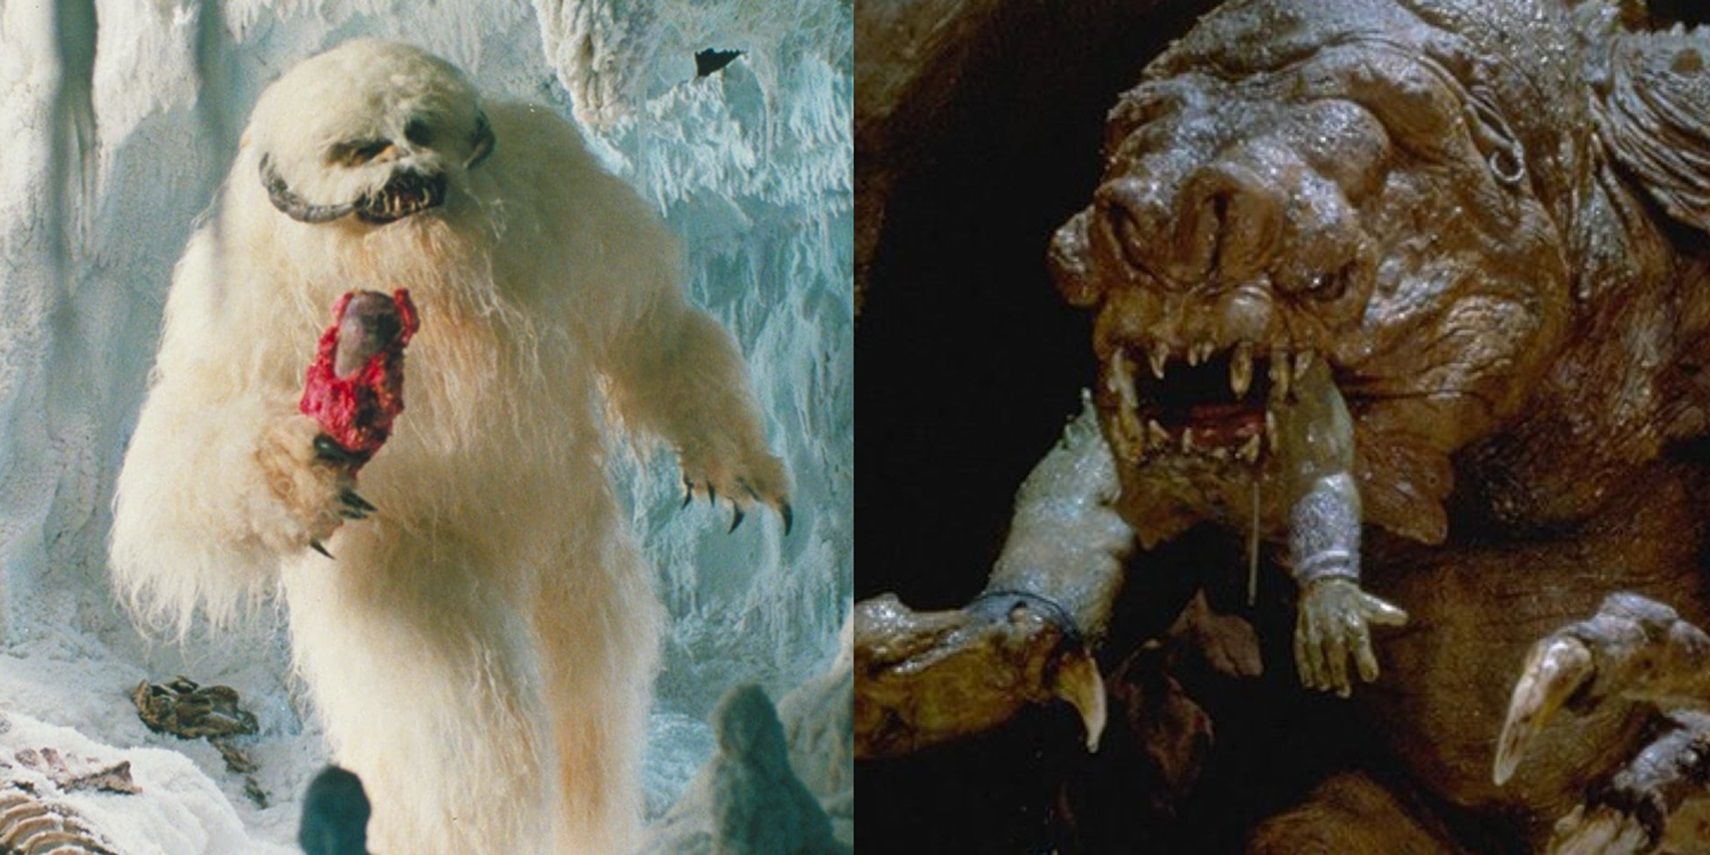 Split image of the Rancor and Wampa monsters from the Star Wars original trilogy.